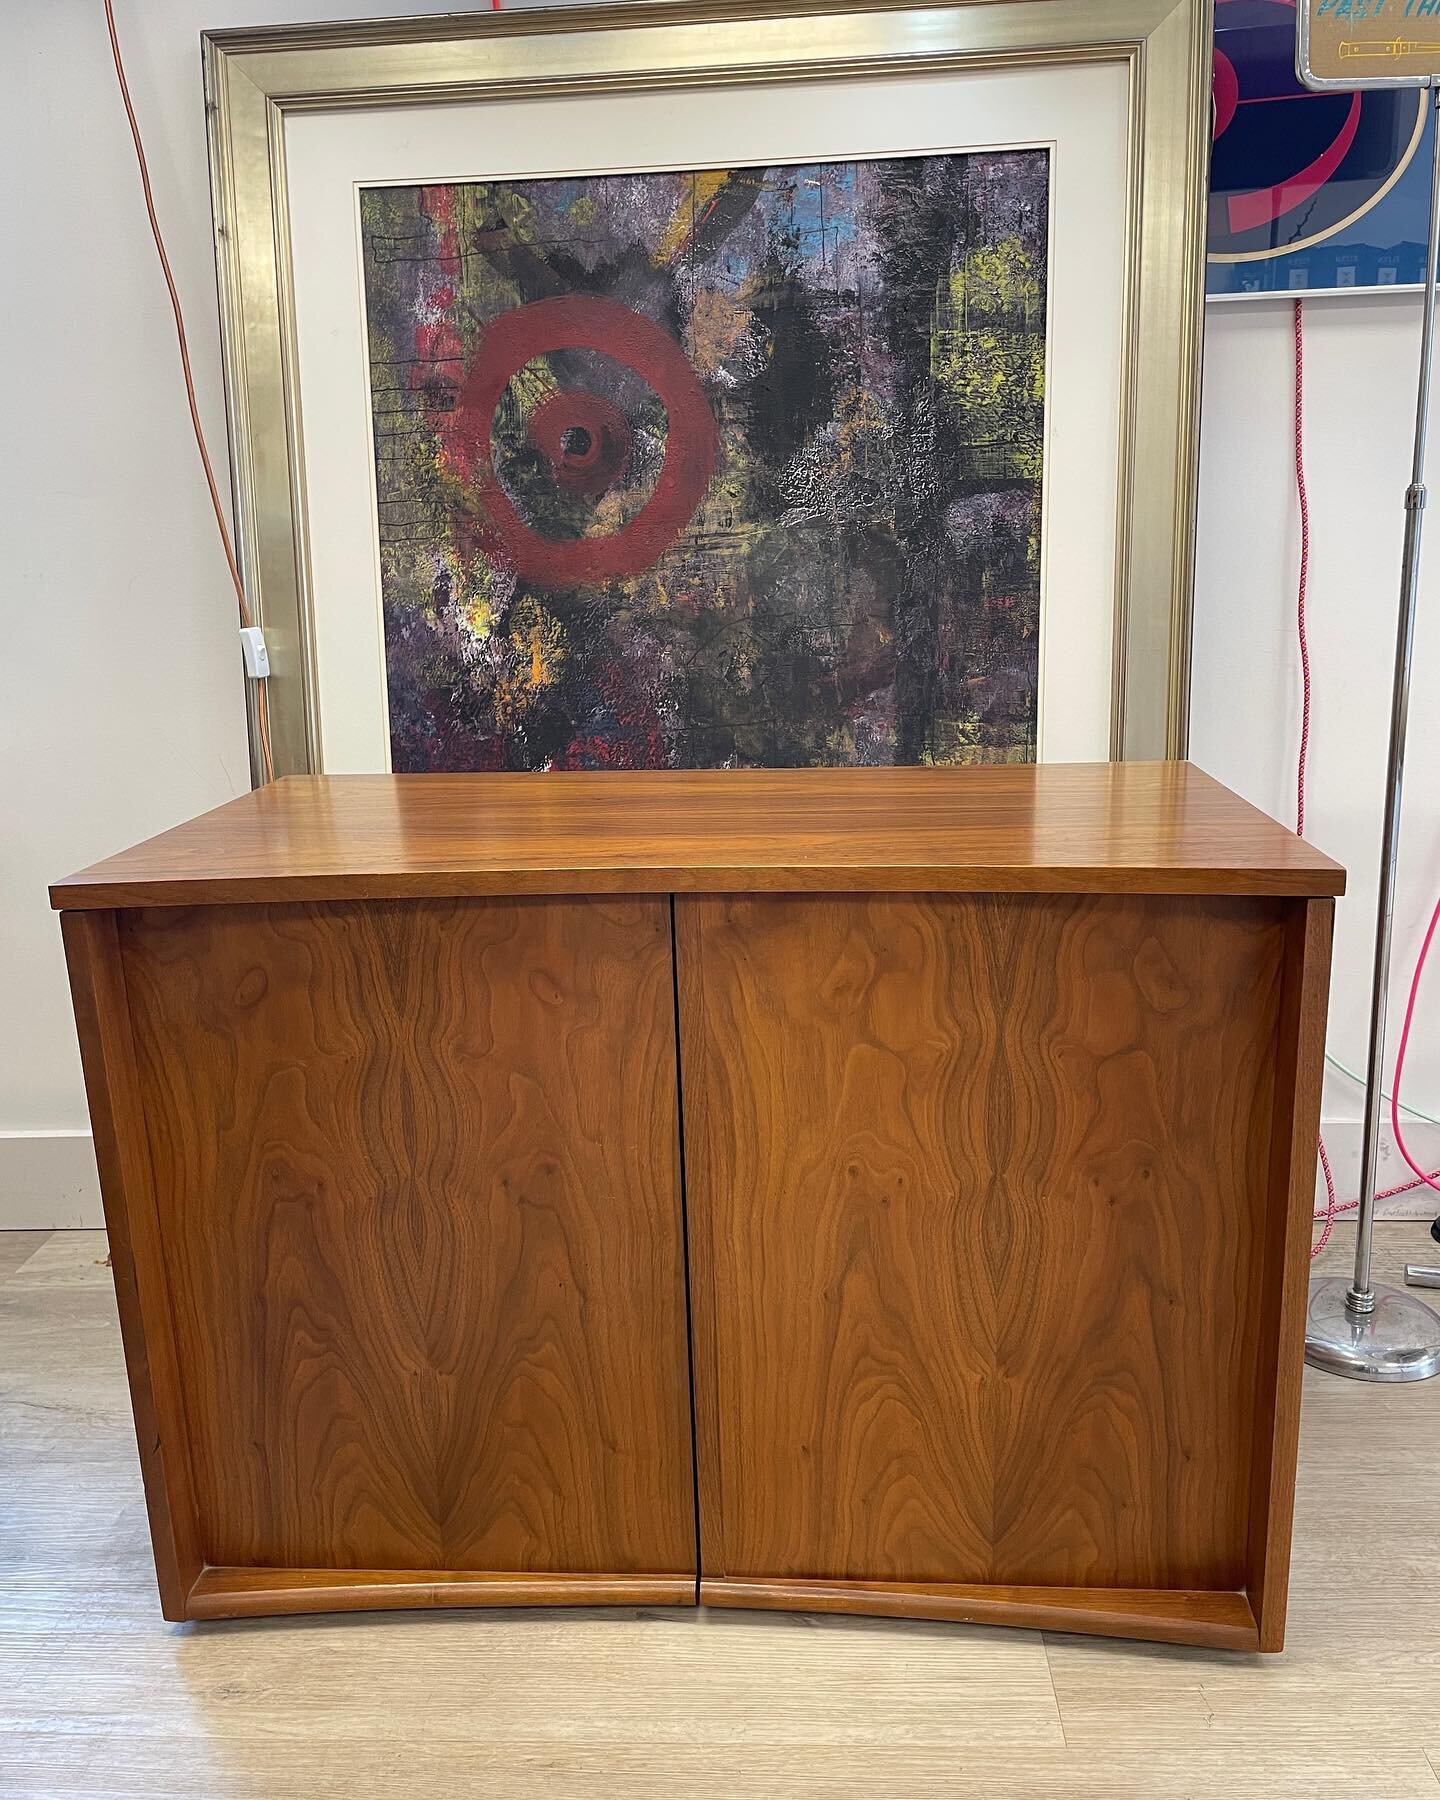 💥For Sale!💥 Everybody&rsquo;s always like, I need a credenza under 50&rdquo;, find me a credenza under 50&rdquo;&hellip; Welllllllll here&rsquo;s your chance!! Total smoke show from Young Mfg with the curved front, ready to rip.  Some marks on the 